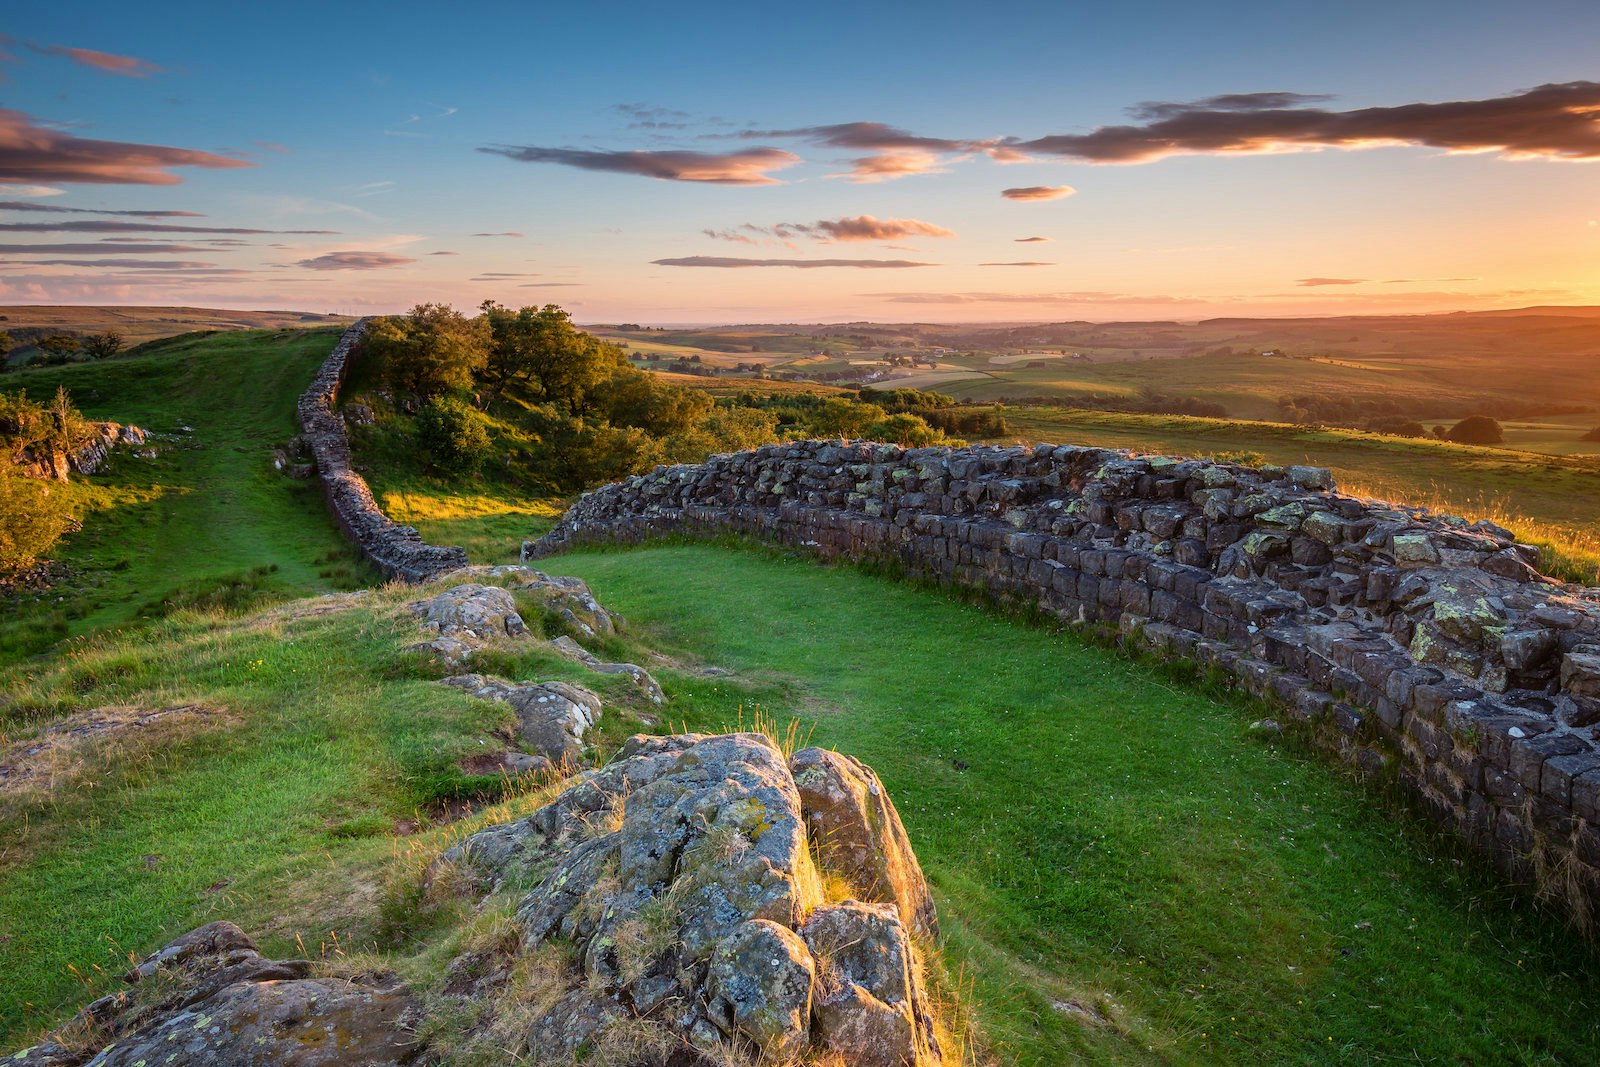 Hadrian's Wall as the sun sets creating an orange glow in the distant clouds